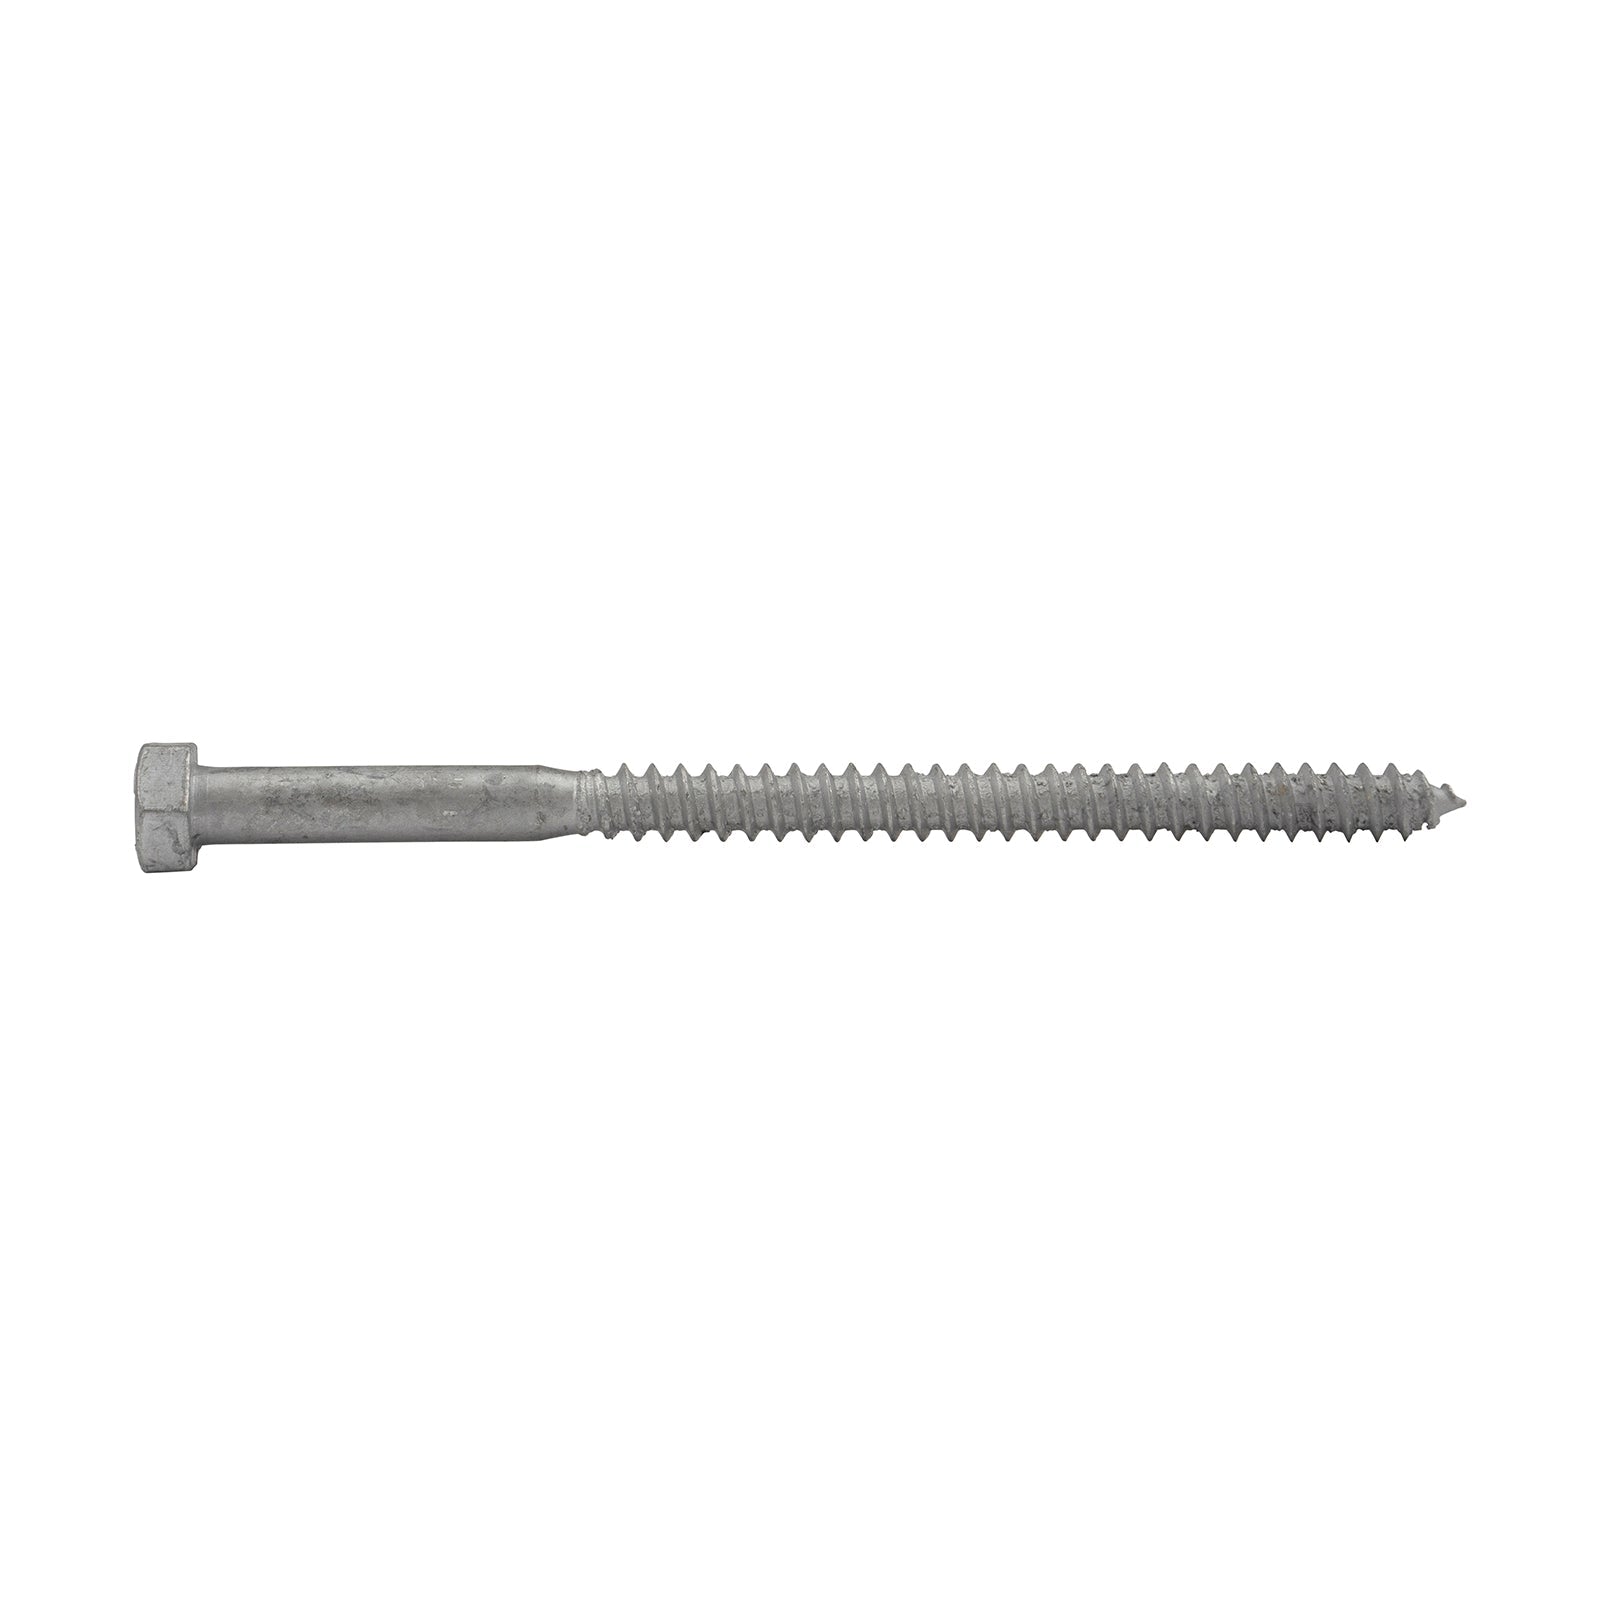 5/16"-9 x 5" Conquest Hex Head Lag Bolt for Wood - Hot Dip Galvanized